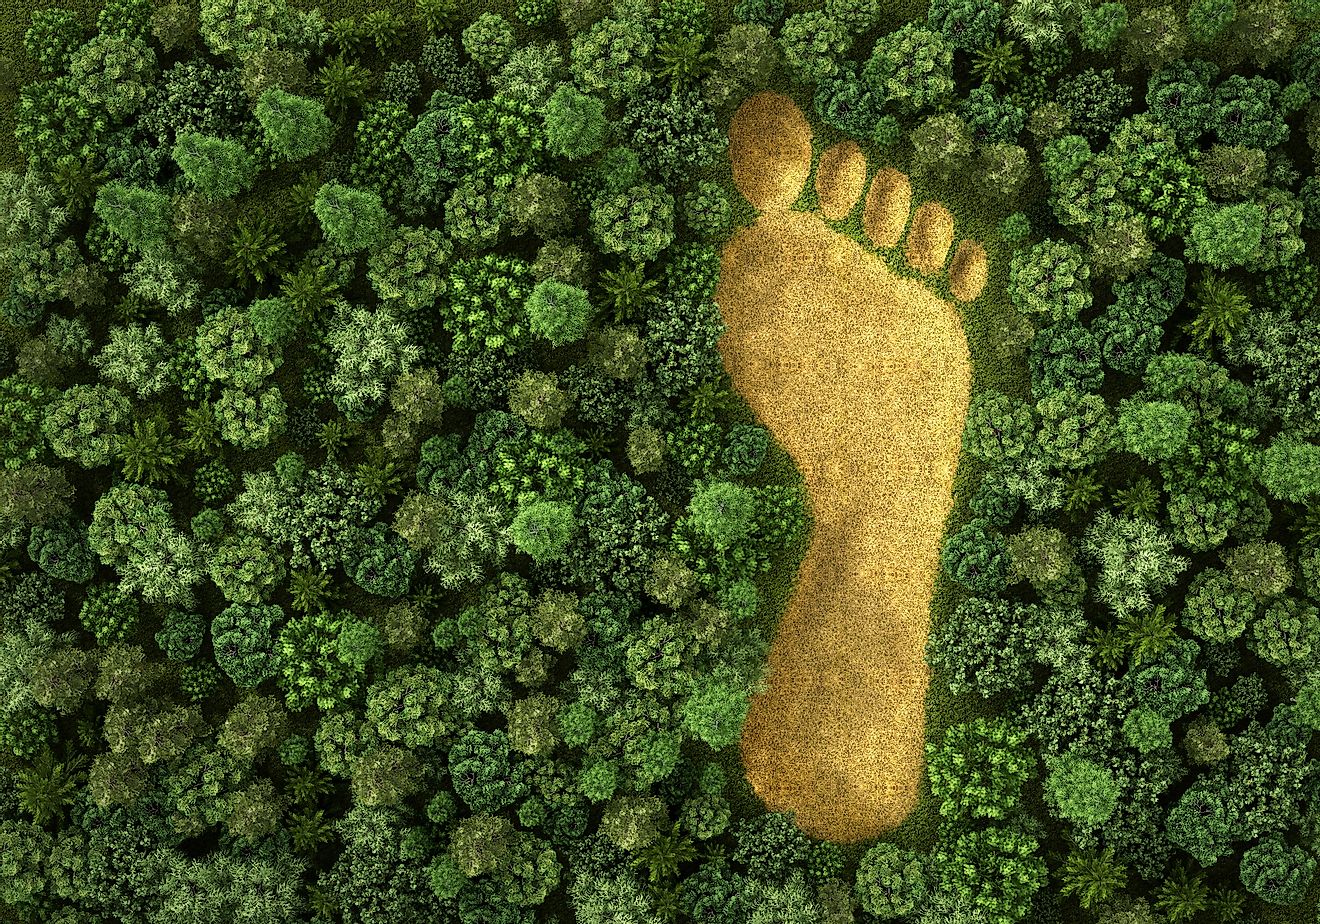 Deforestation is one of the worst effects of growing ecological footprint. Image credit: urfin/shutterstock.com